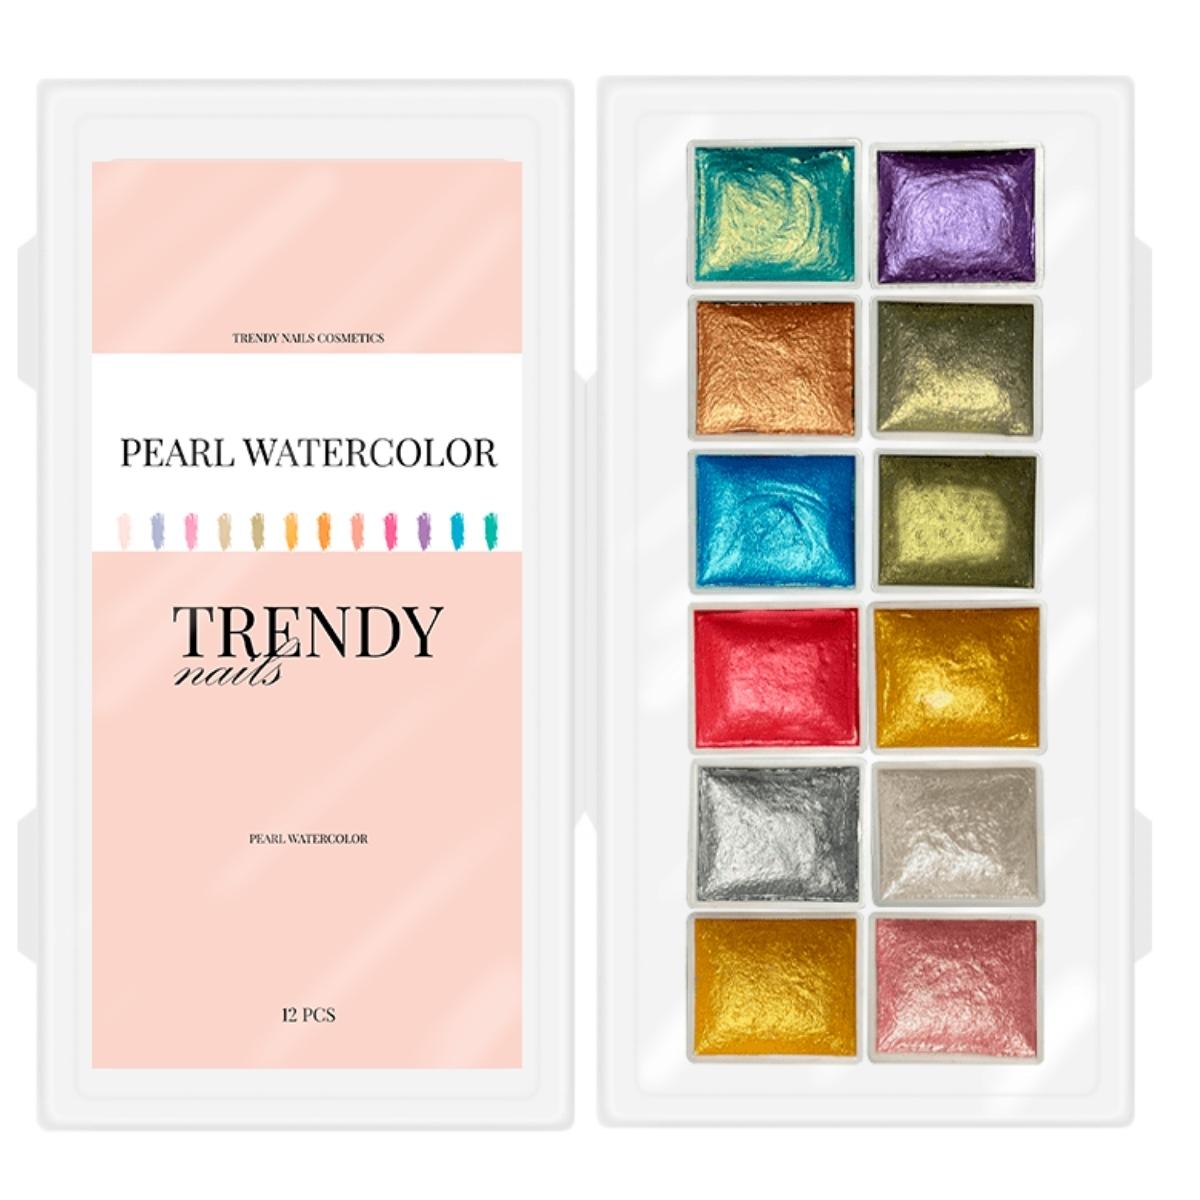 PEARL WATER COLOR PALETTE